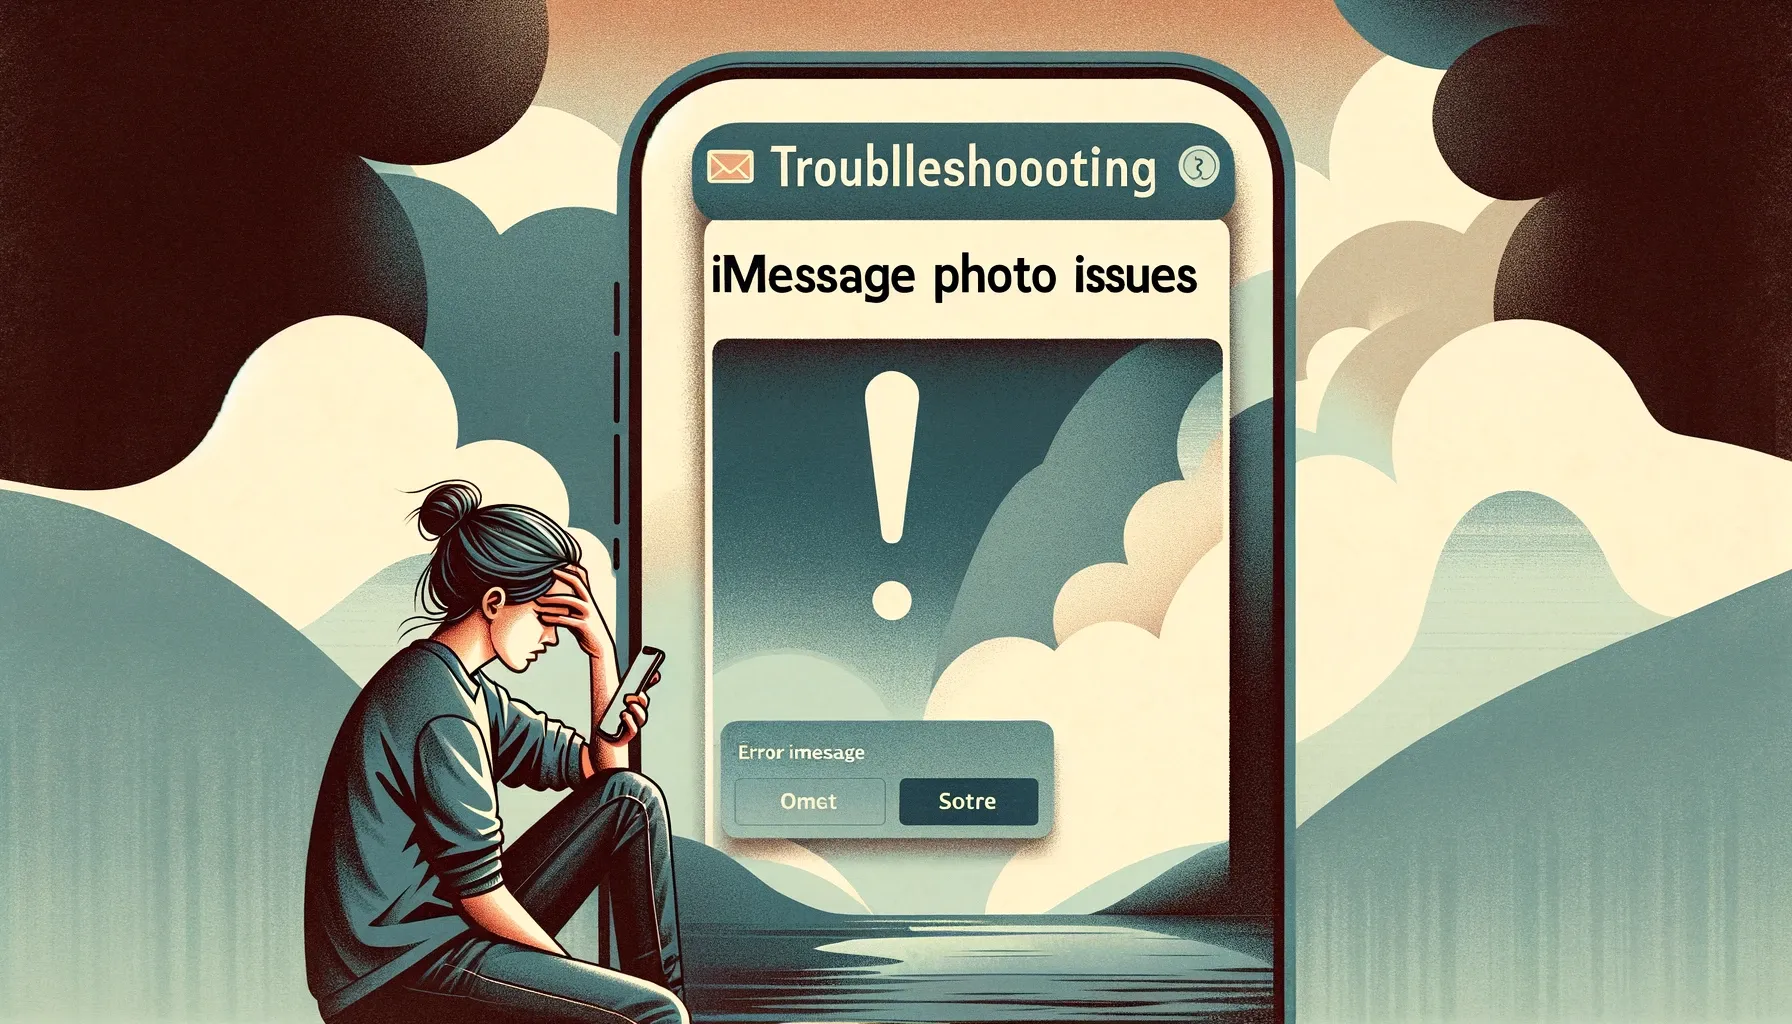 Troubleshooting iMessage Photo Issues